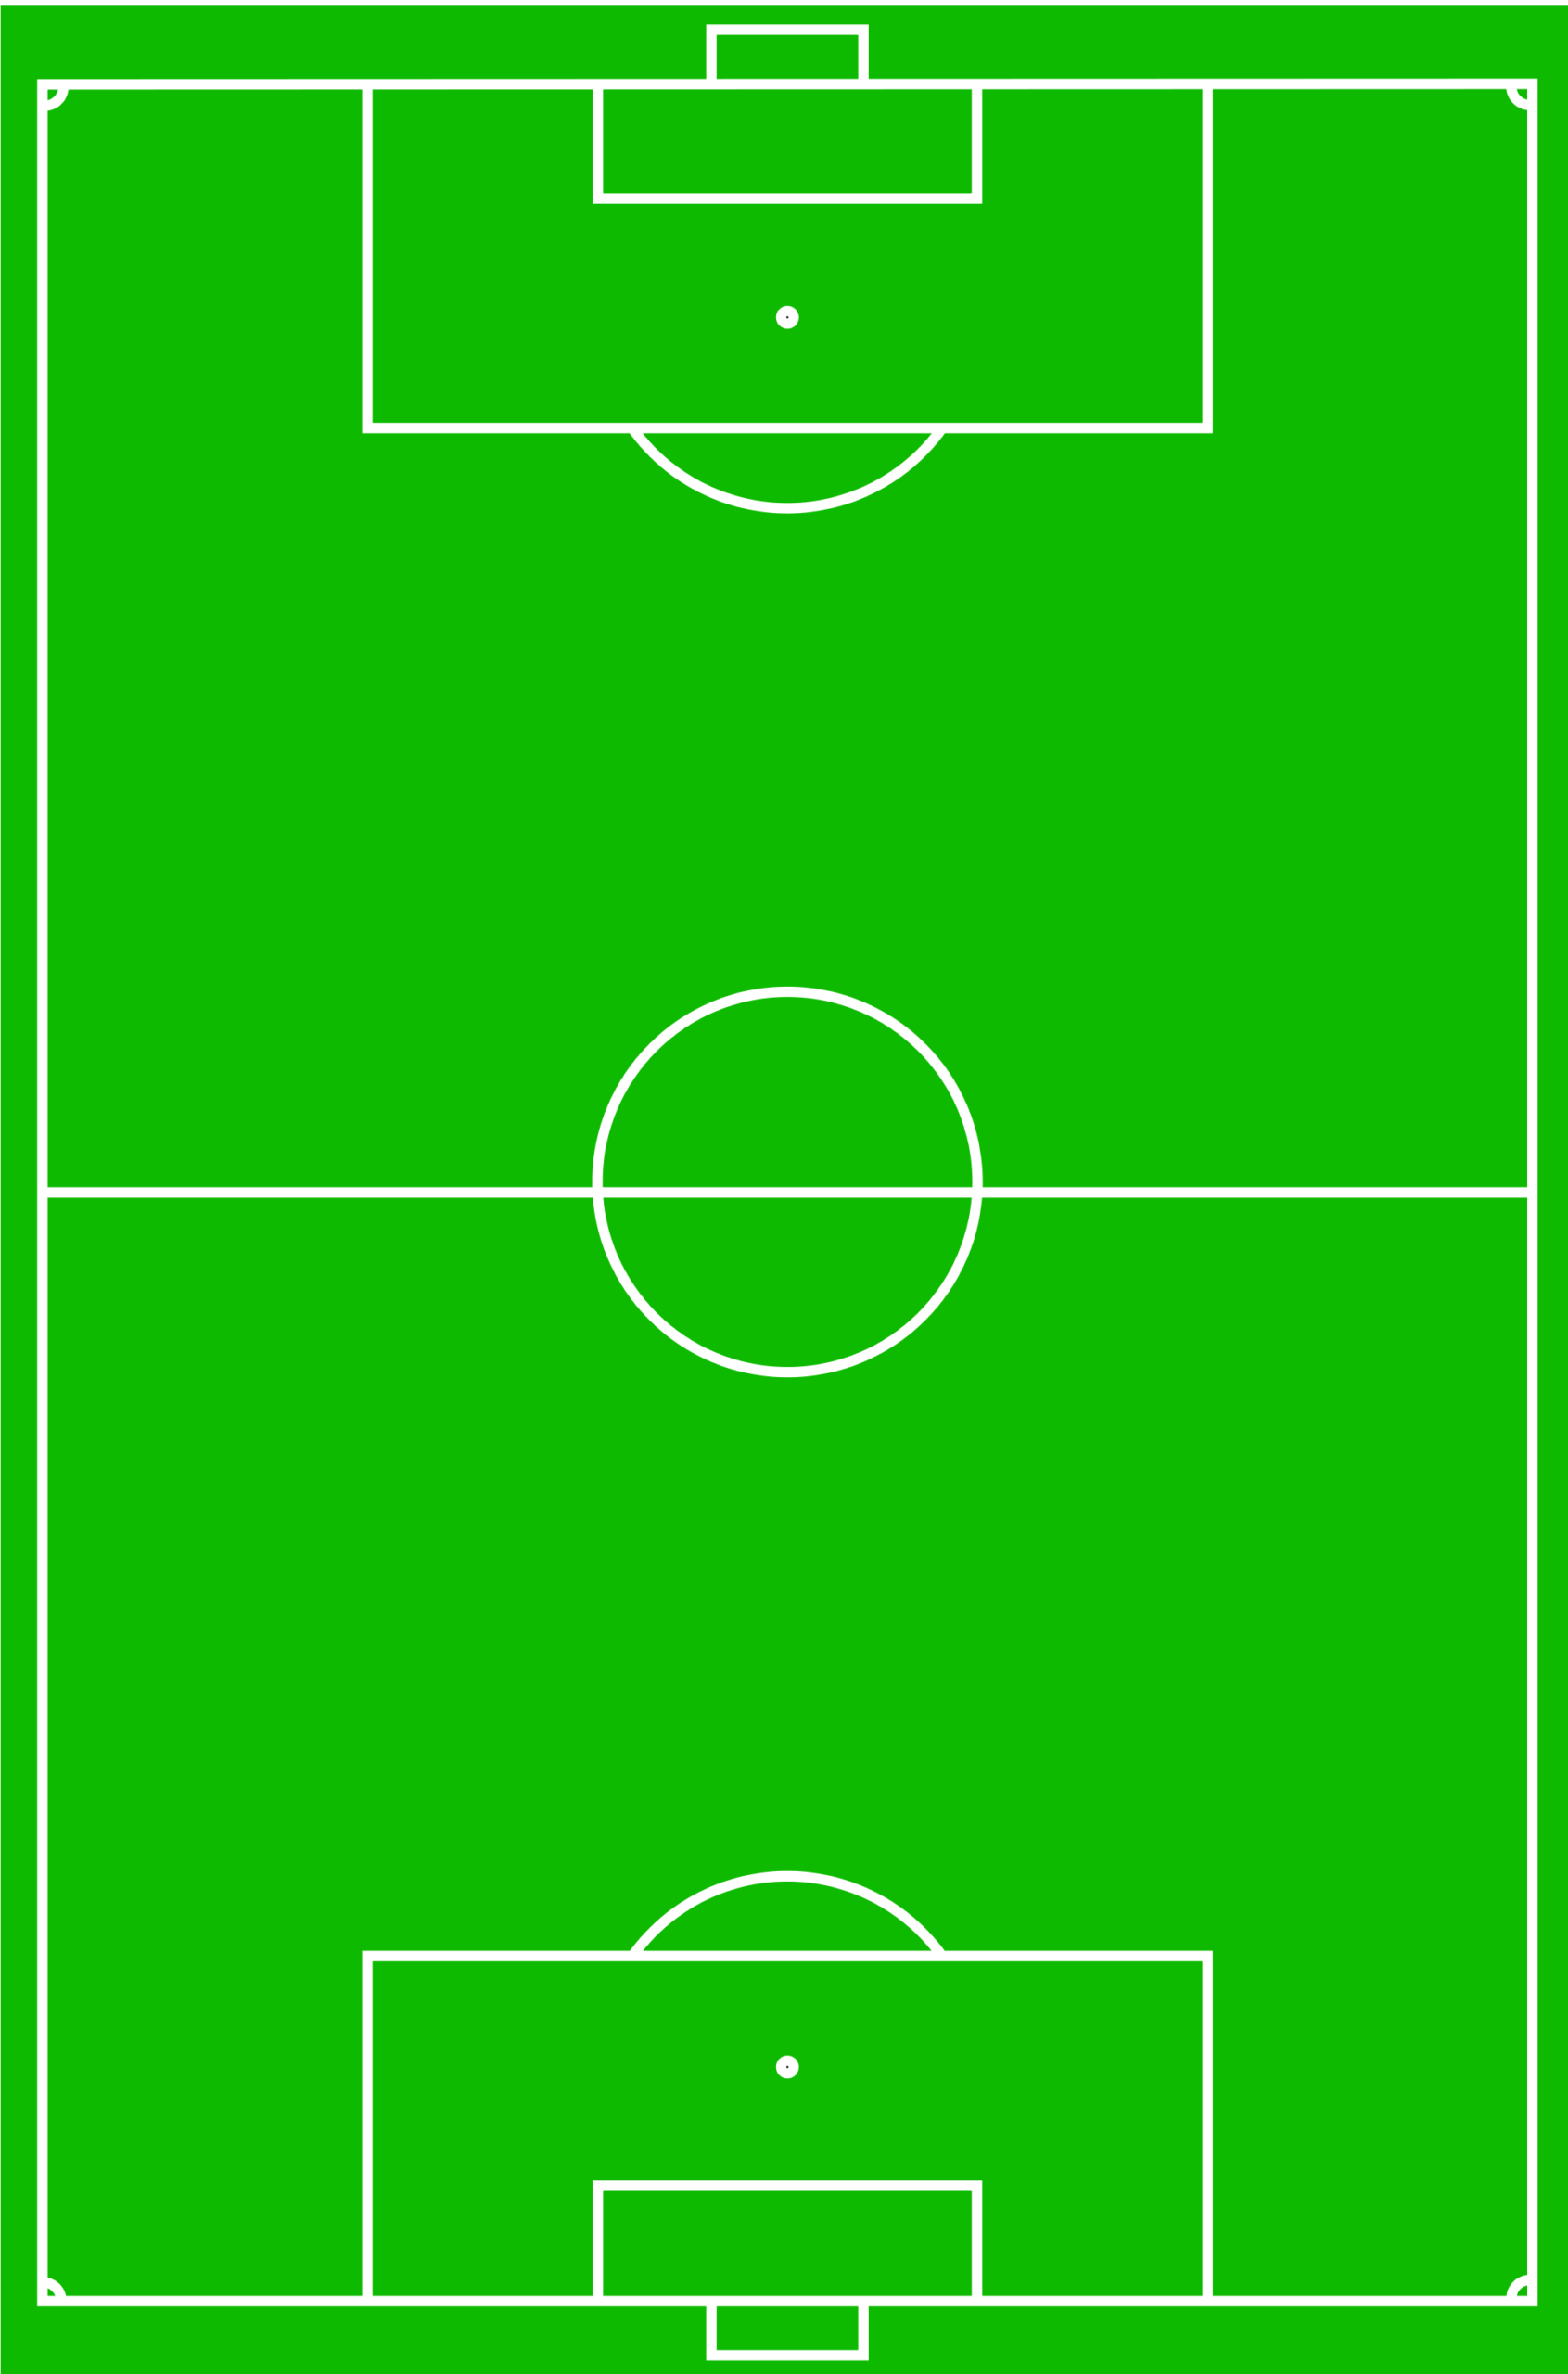 Library Of Football Field Border Clip Art Royalty Free With Blank Football Field Template